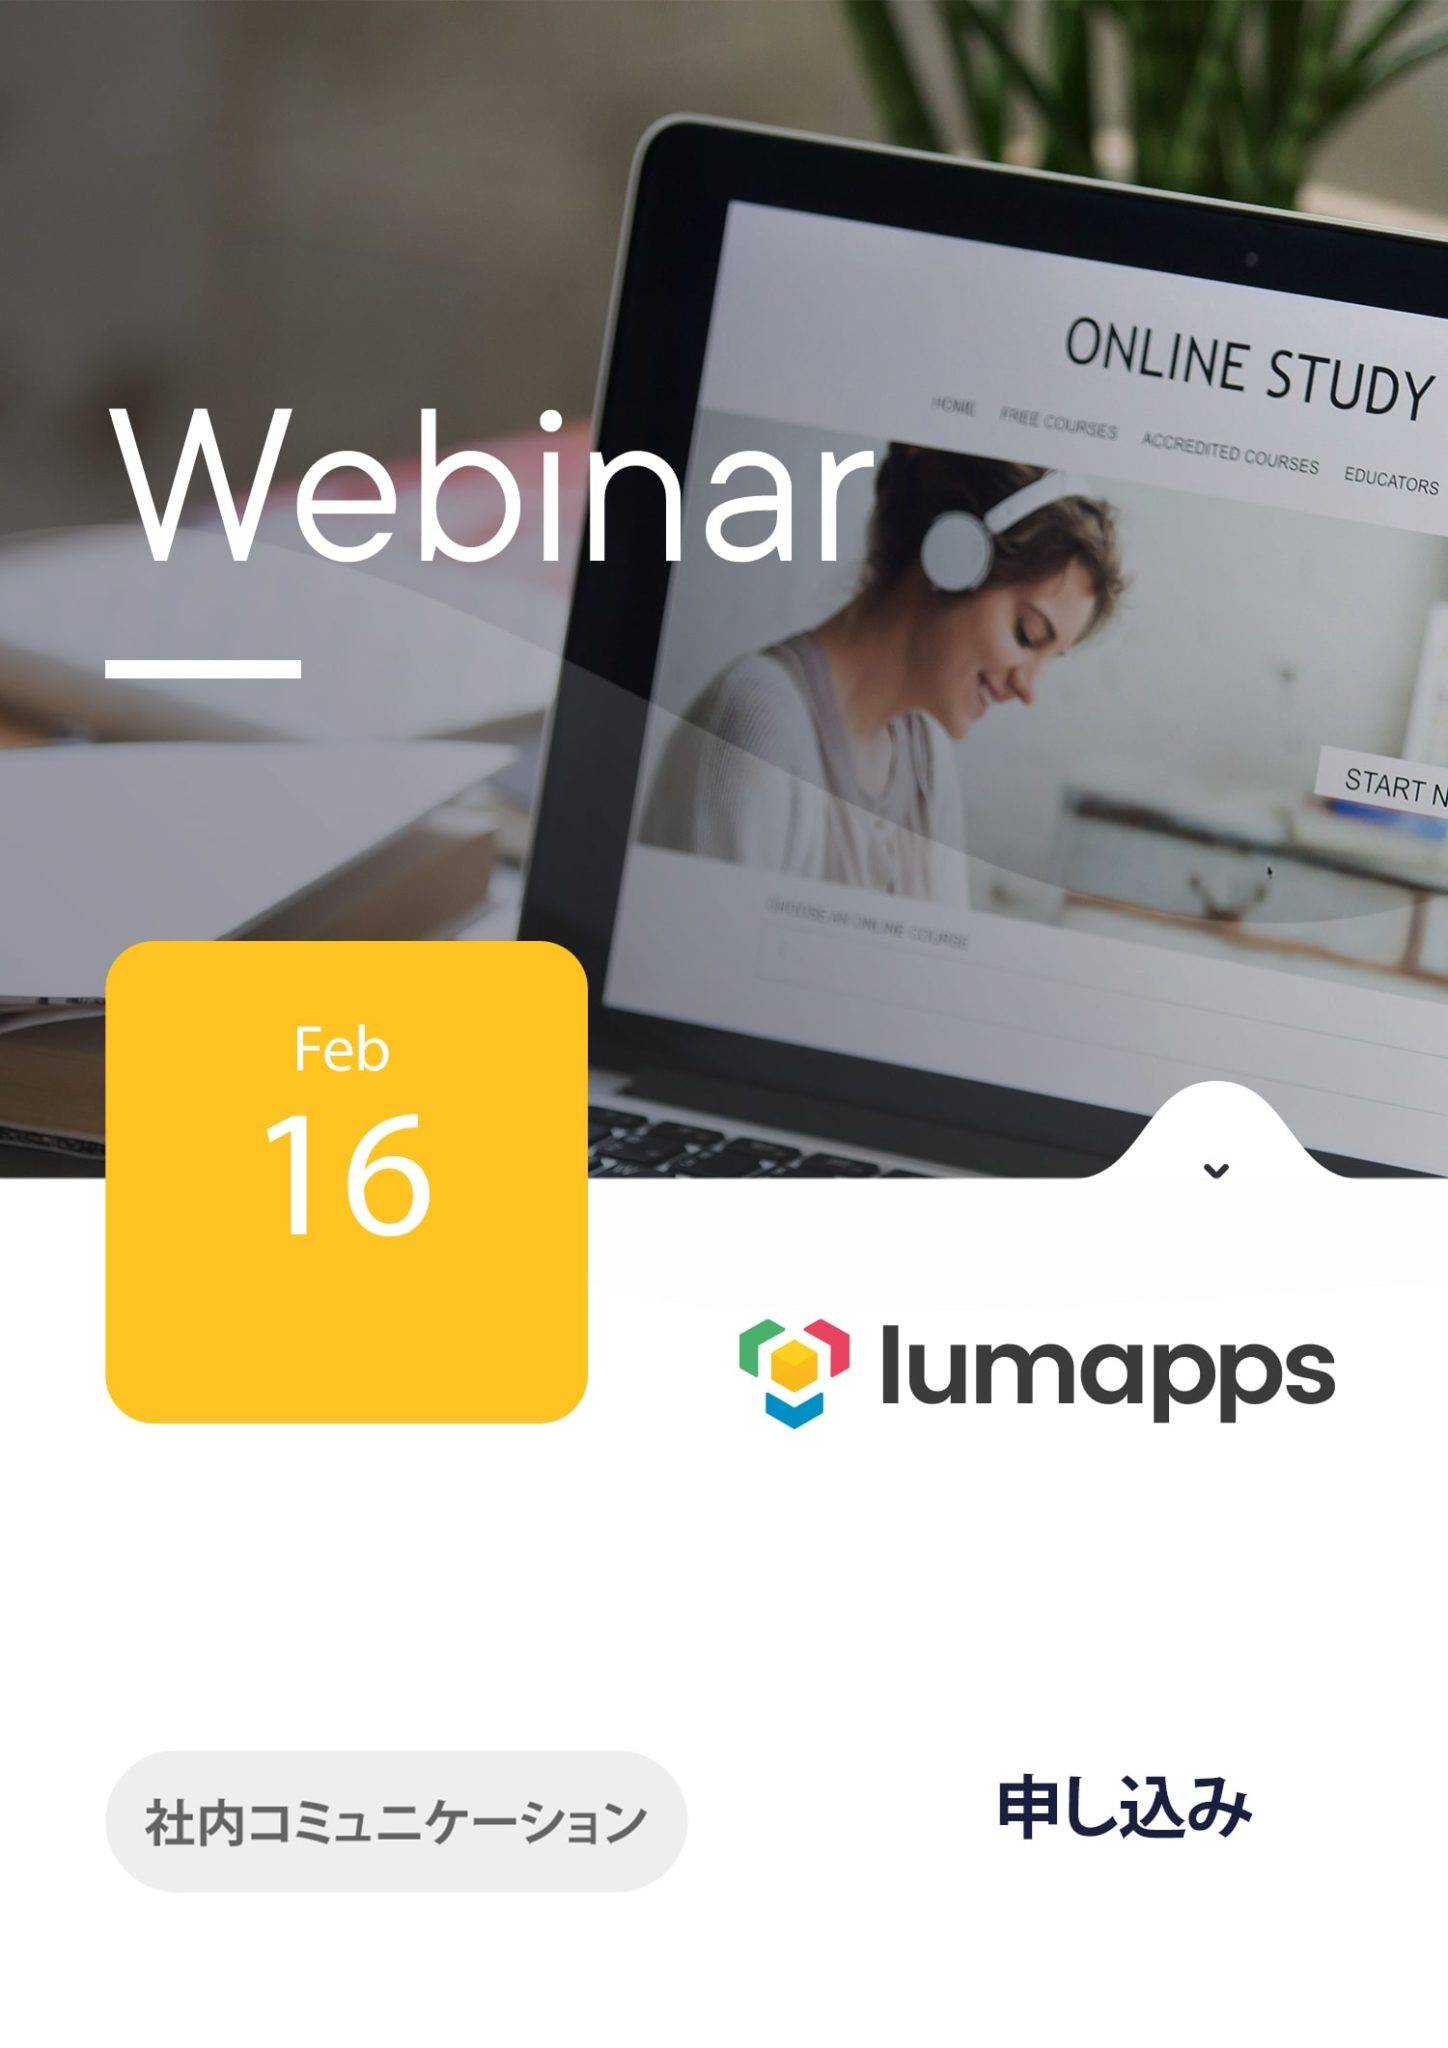 Webinar JP Not only Email